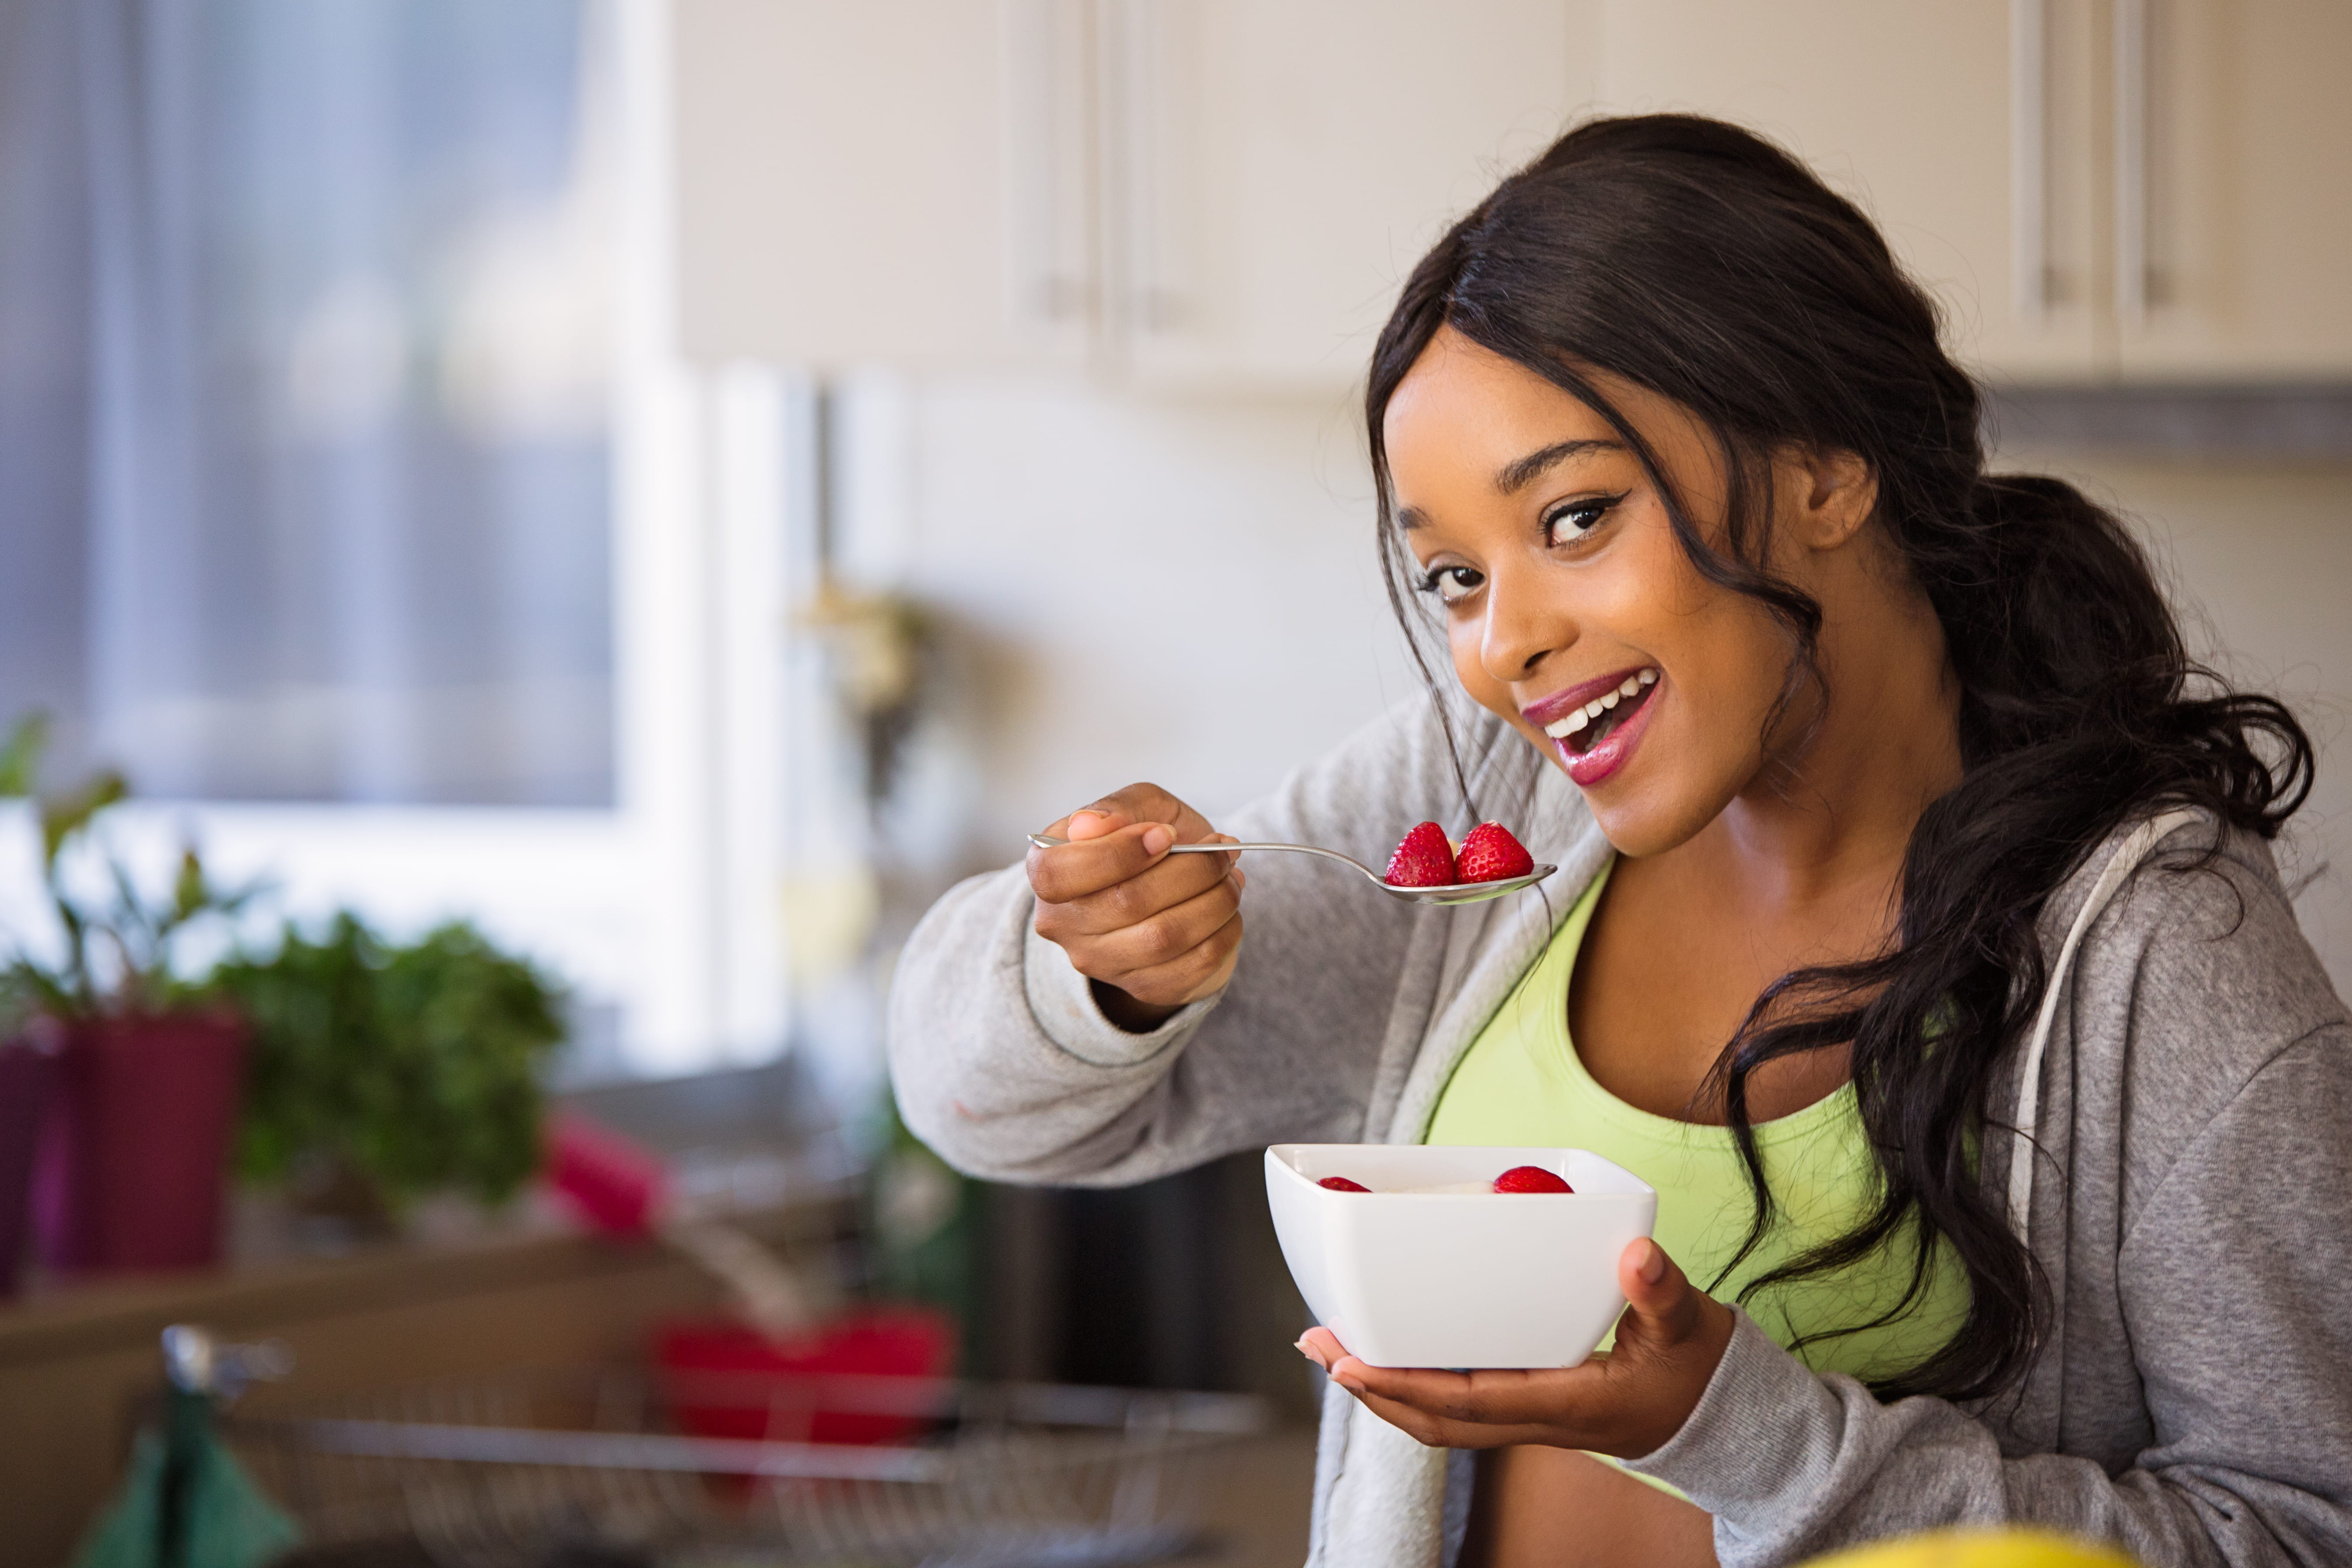 Woman About to Eat Strawberry, adult, bowl, brunette, eating healthy